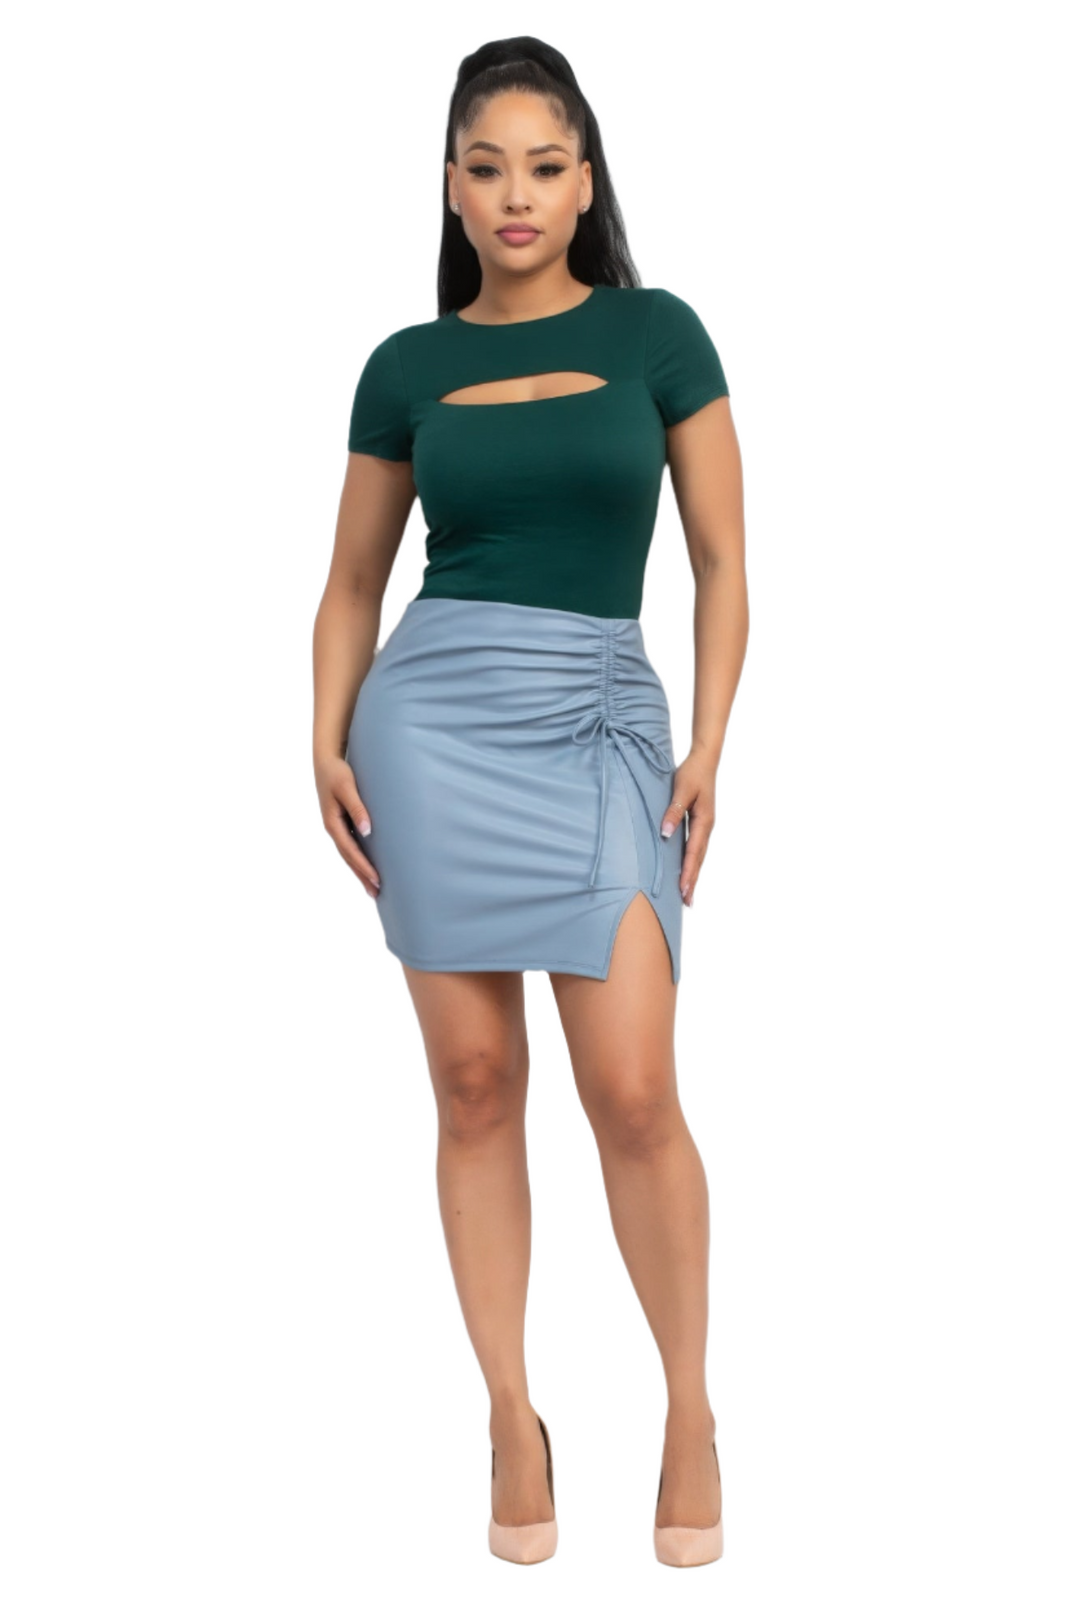 Cut-Out Double Layer Top in Classic Hunter Green with Front Cut-Out Detail & Double-Layer Design